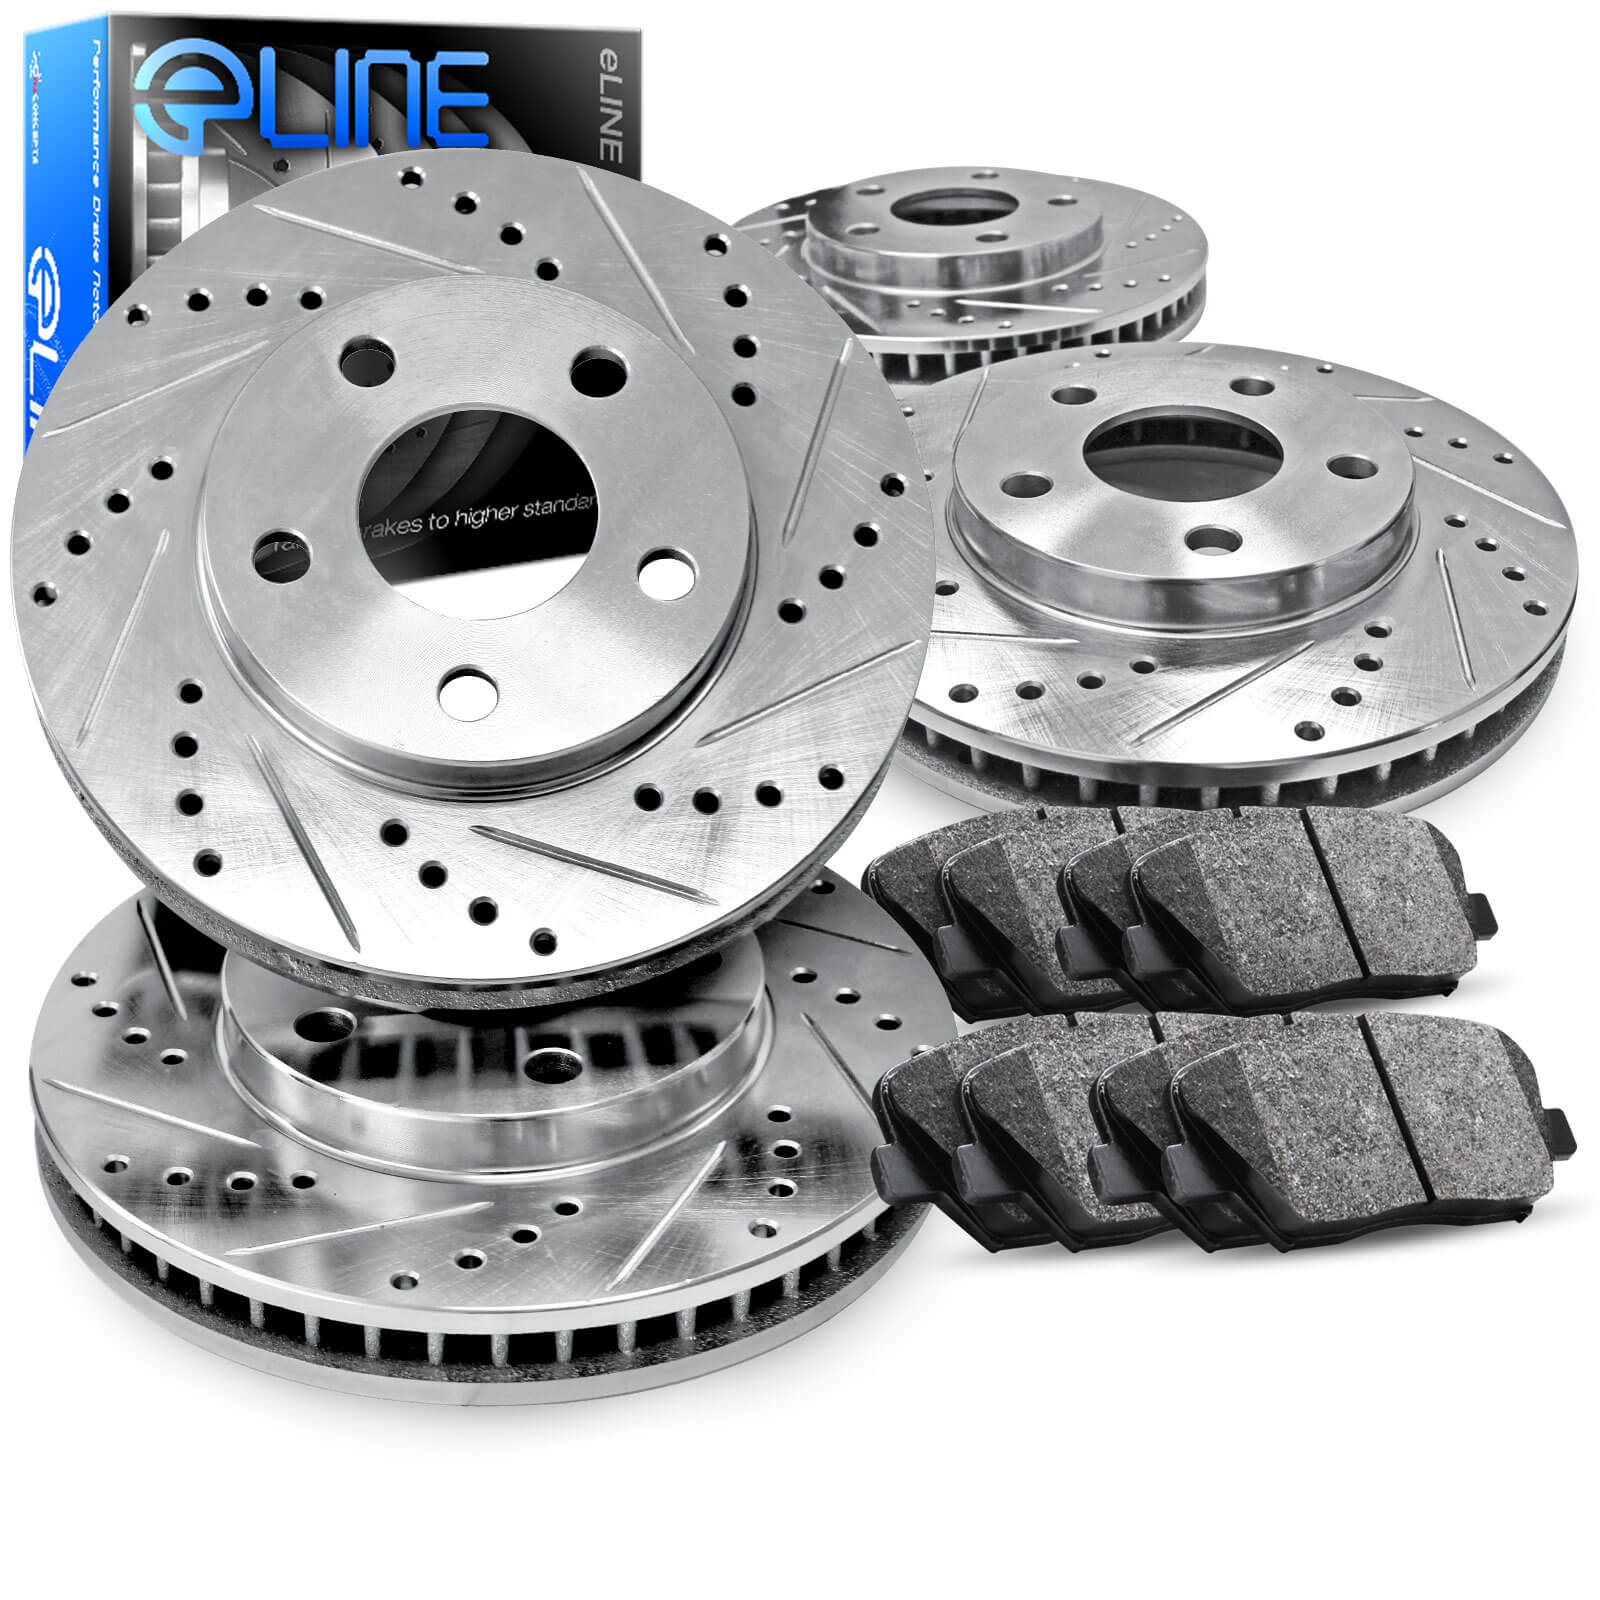 R1 Concepts KEOE11950 Eline Series Replacement Rotors And Ceramic Pads Kit Front 